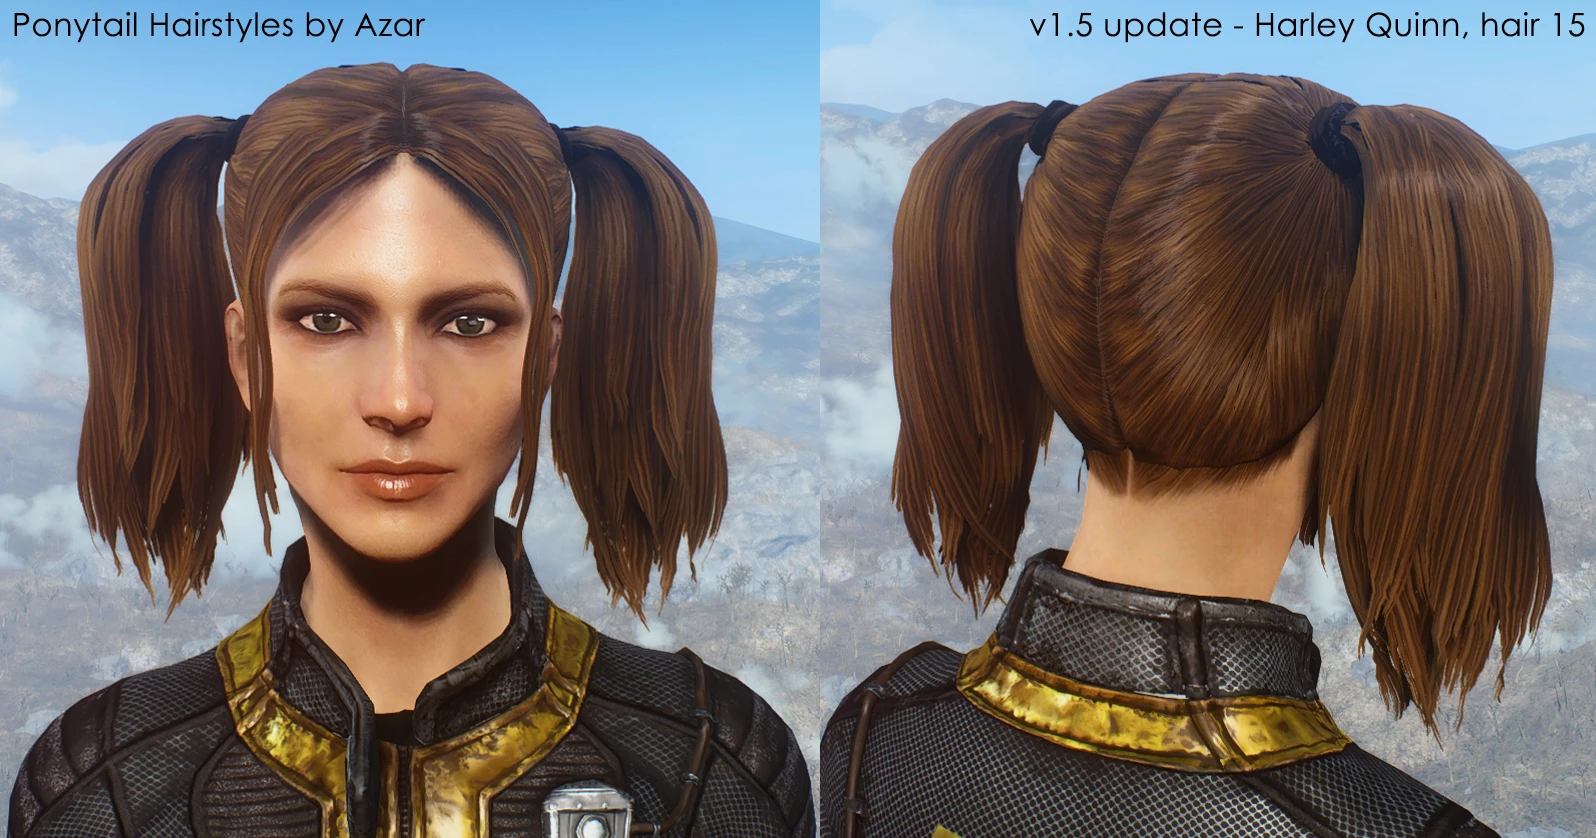 Ponytail hairstyles fallout 4 фото 2